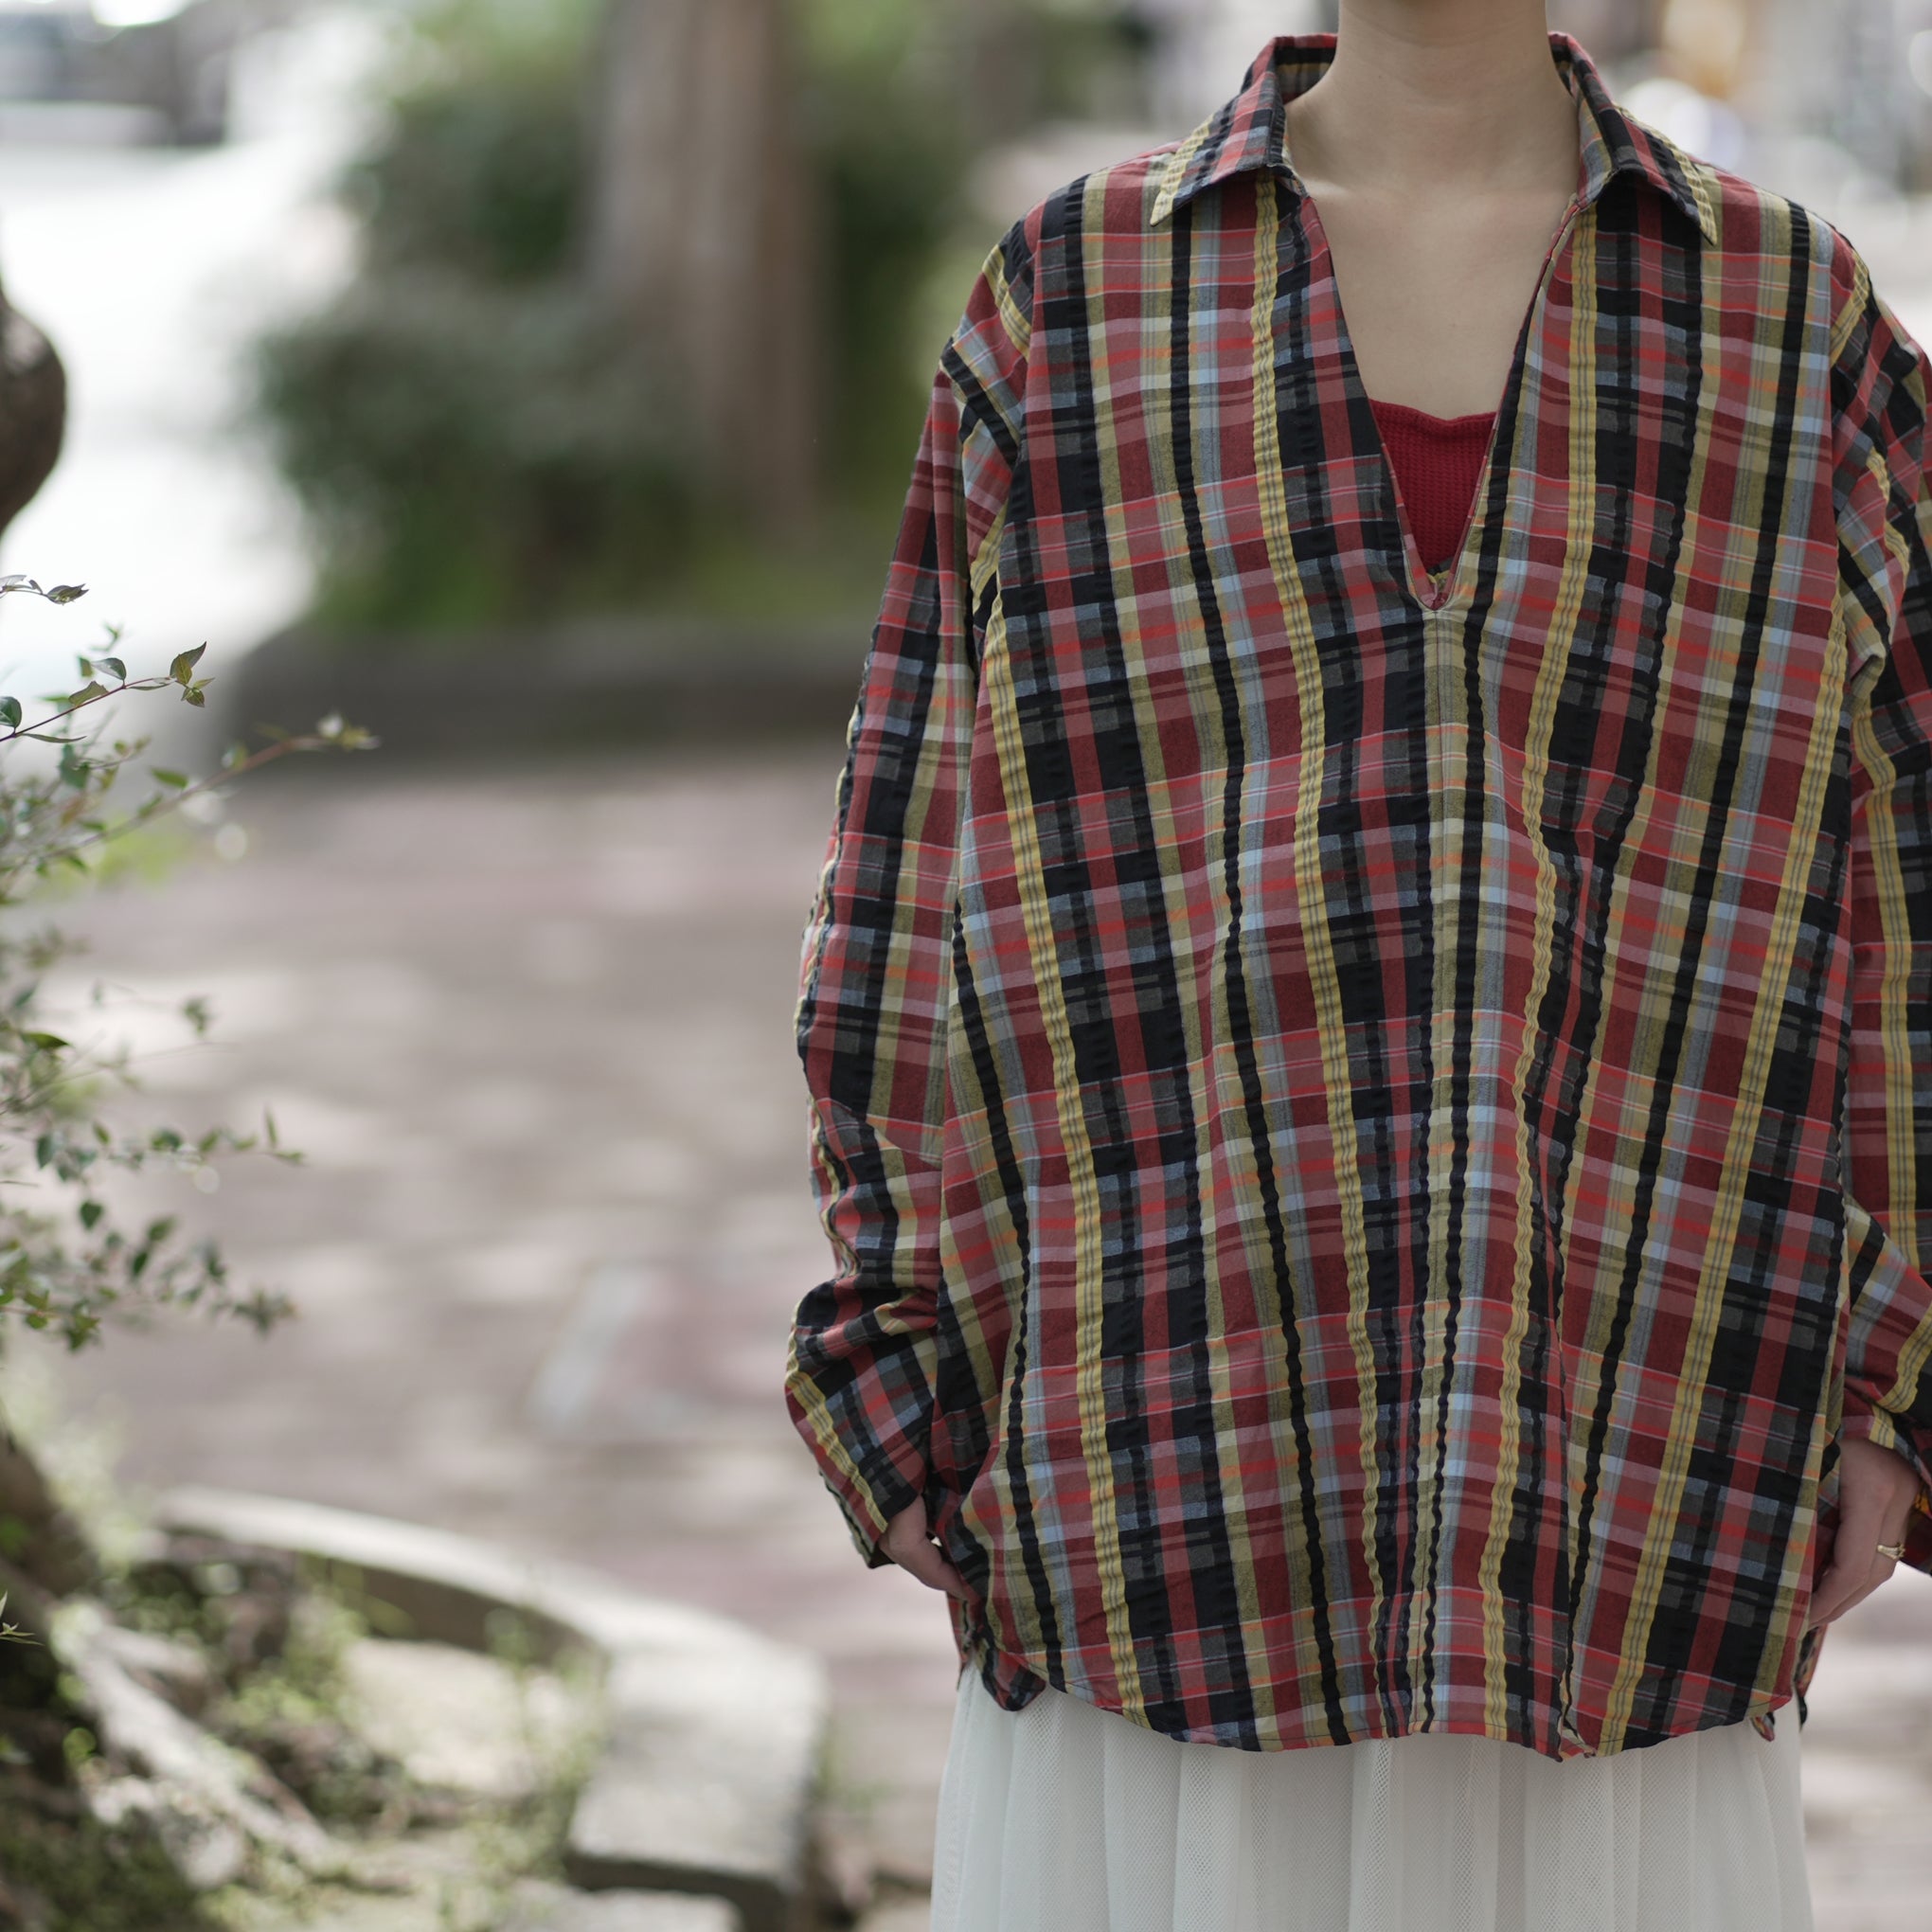 Name: MEX KAFTAN SHIRT | Color:Madrascheck | Size:One 【CITYLIGHTS PRODUCTS_シティライツプロダクツ】